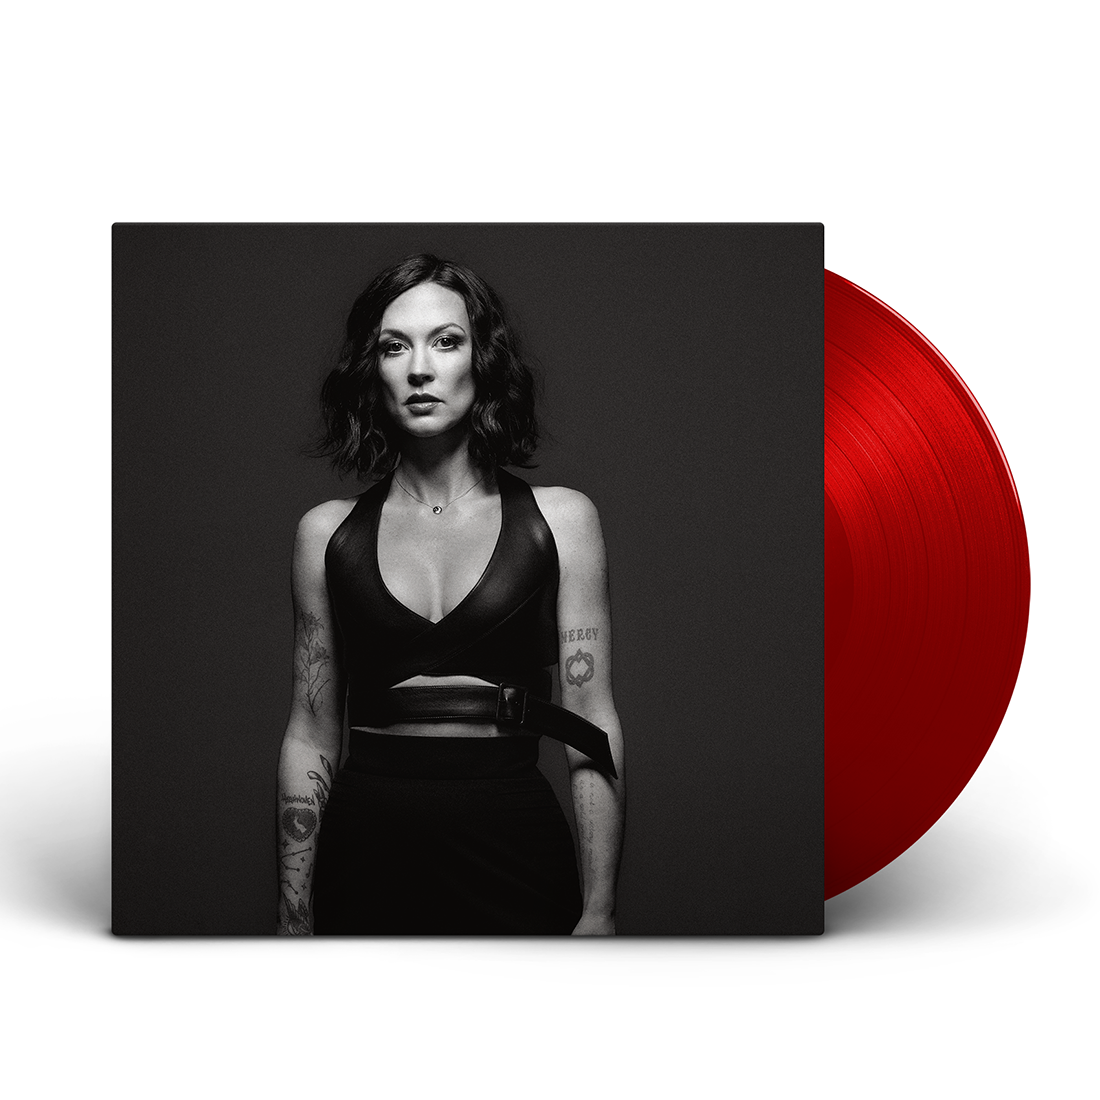 Take It Like A Man: Limited Red Vinyl LP